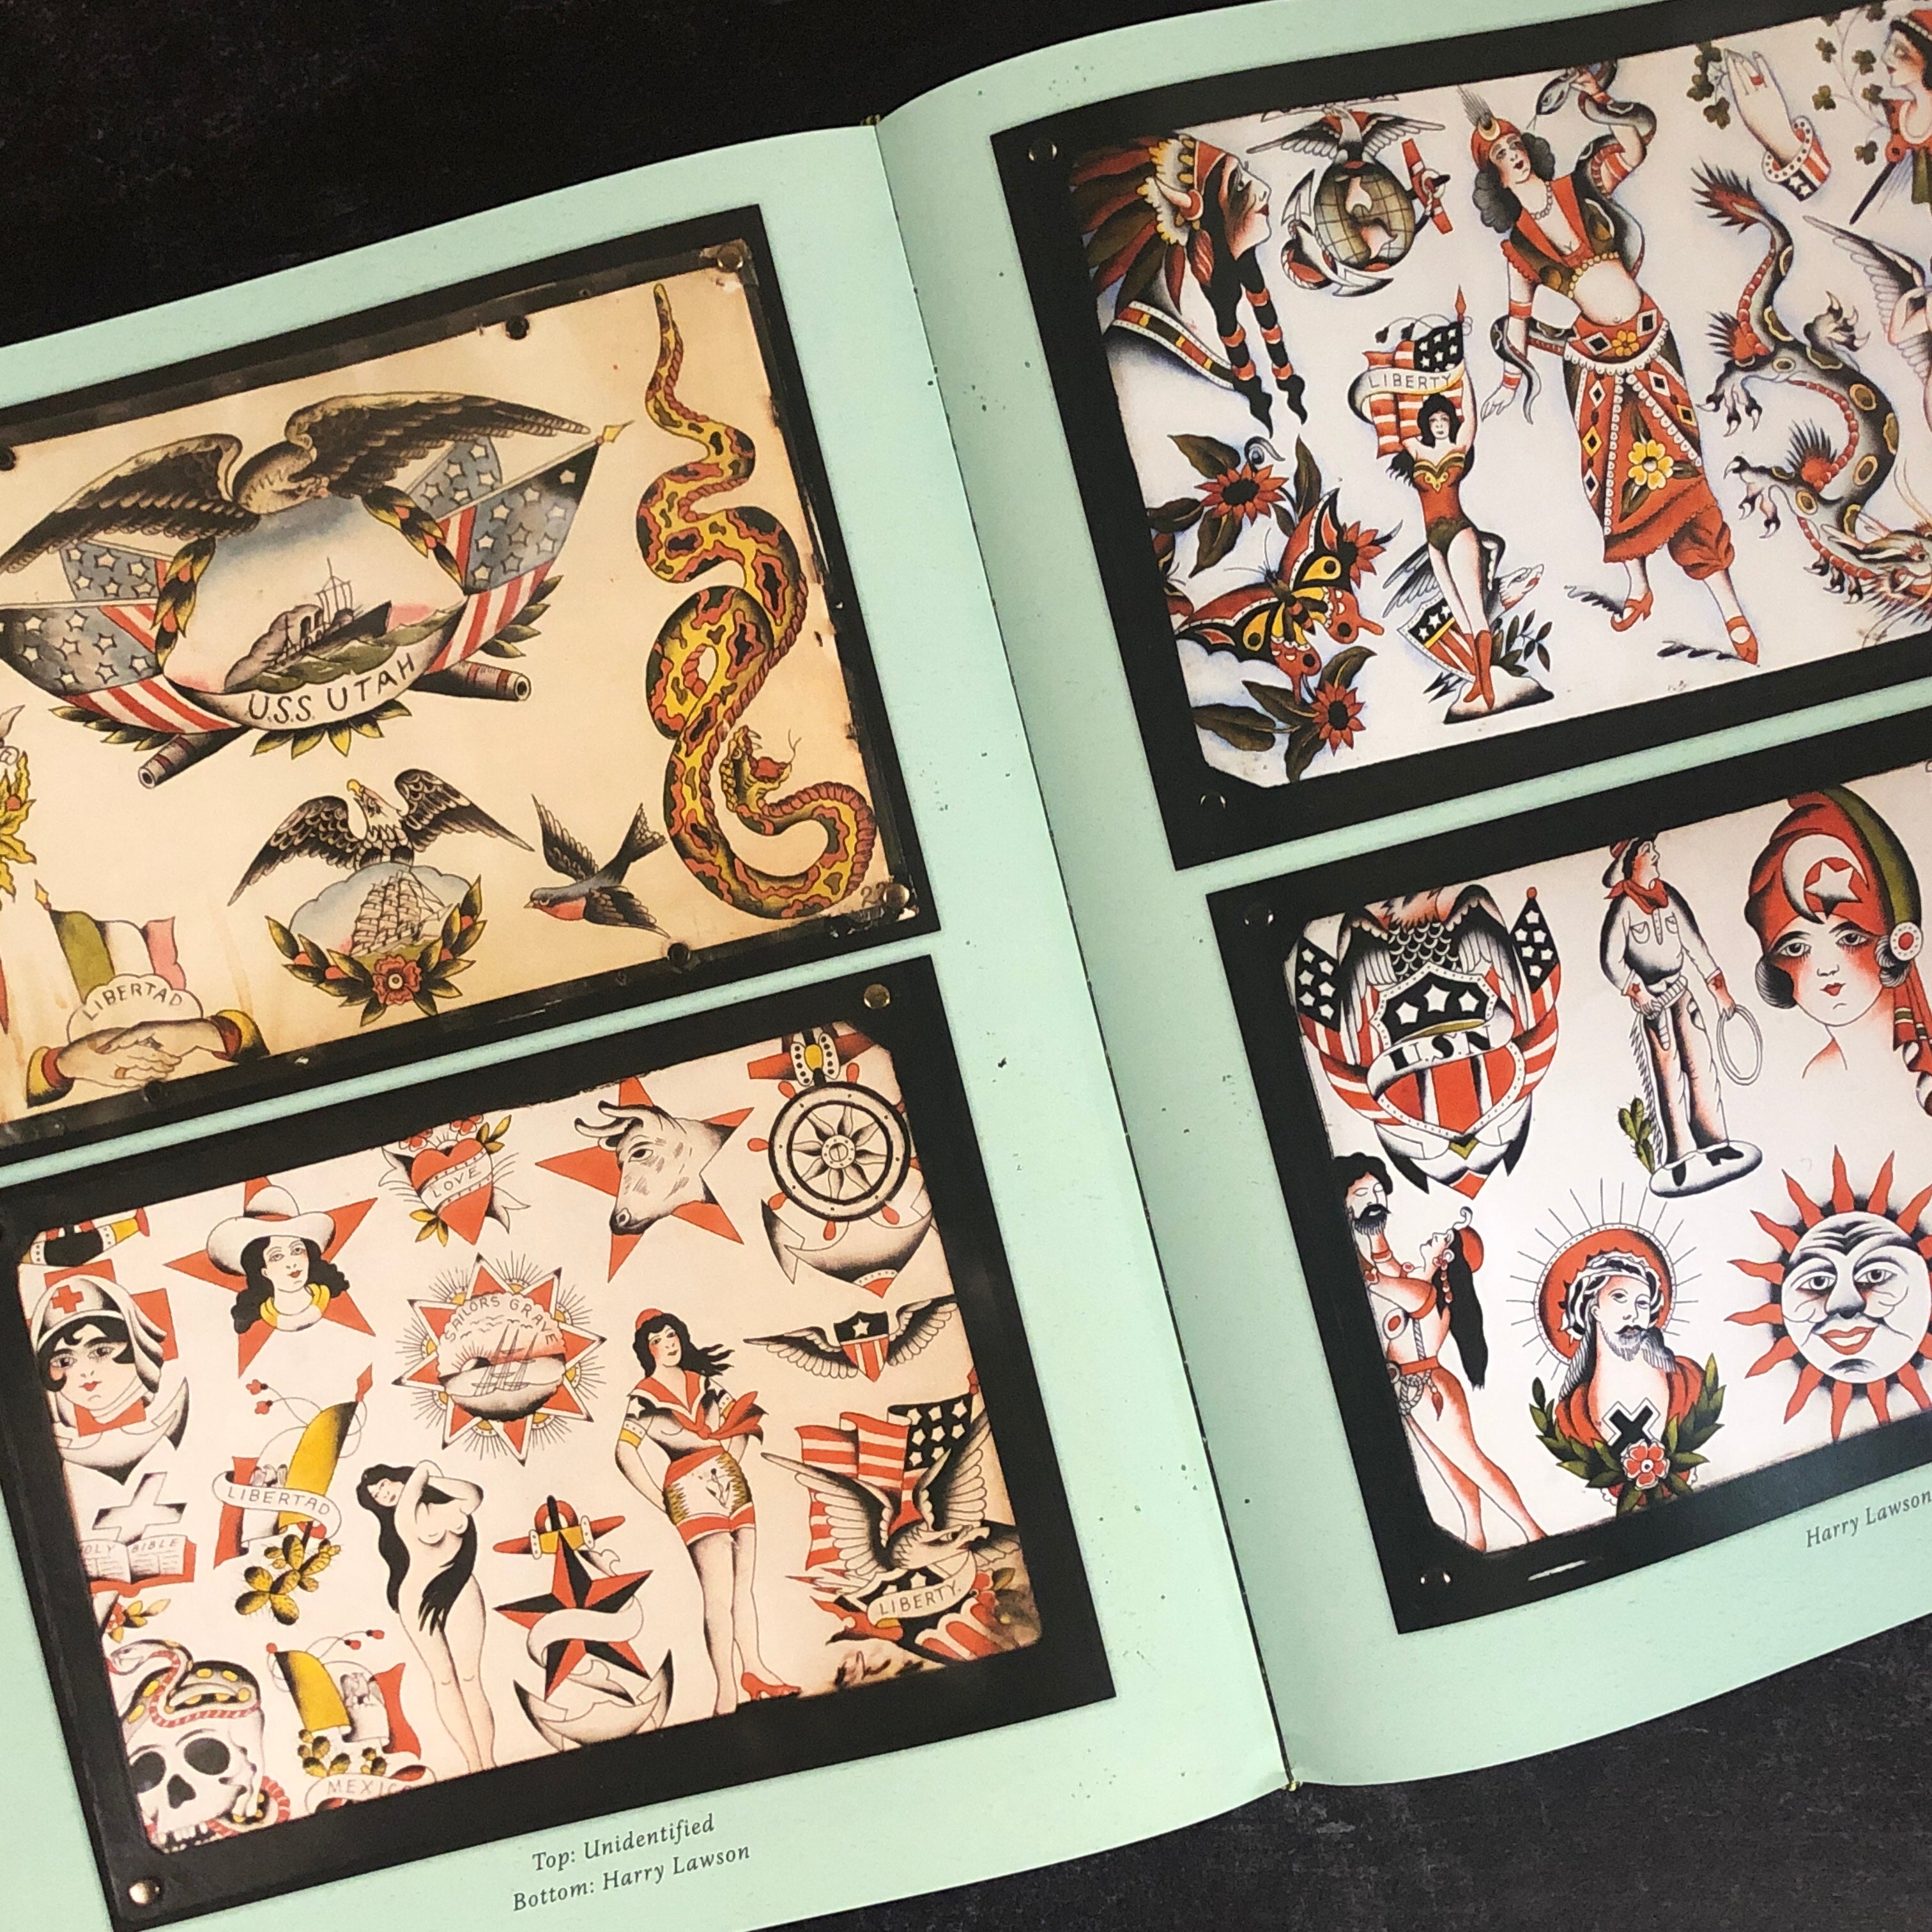 Free Download Vintage Tattoo Flash: 100 Years of Traditional Tattoos from  the Collection by shyannjaylin - Issuu